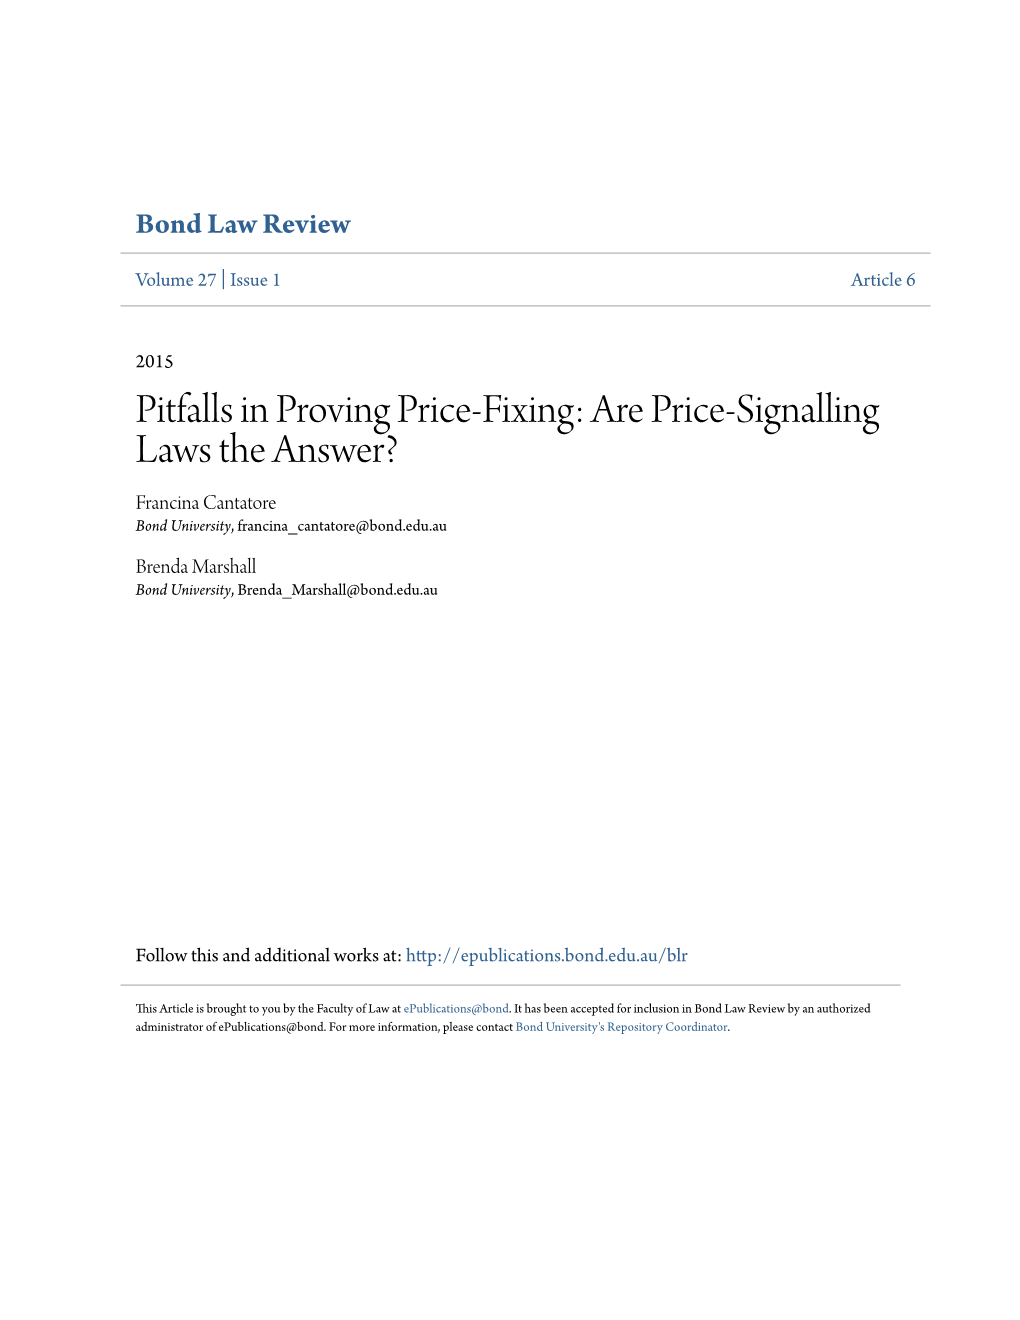 Pitfalls in Proving Price-Fixing: Are Price-Signalling Laws the Answer? Francina Cantatore Bond University, Francina Cantatore@Bond.Edu.Au